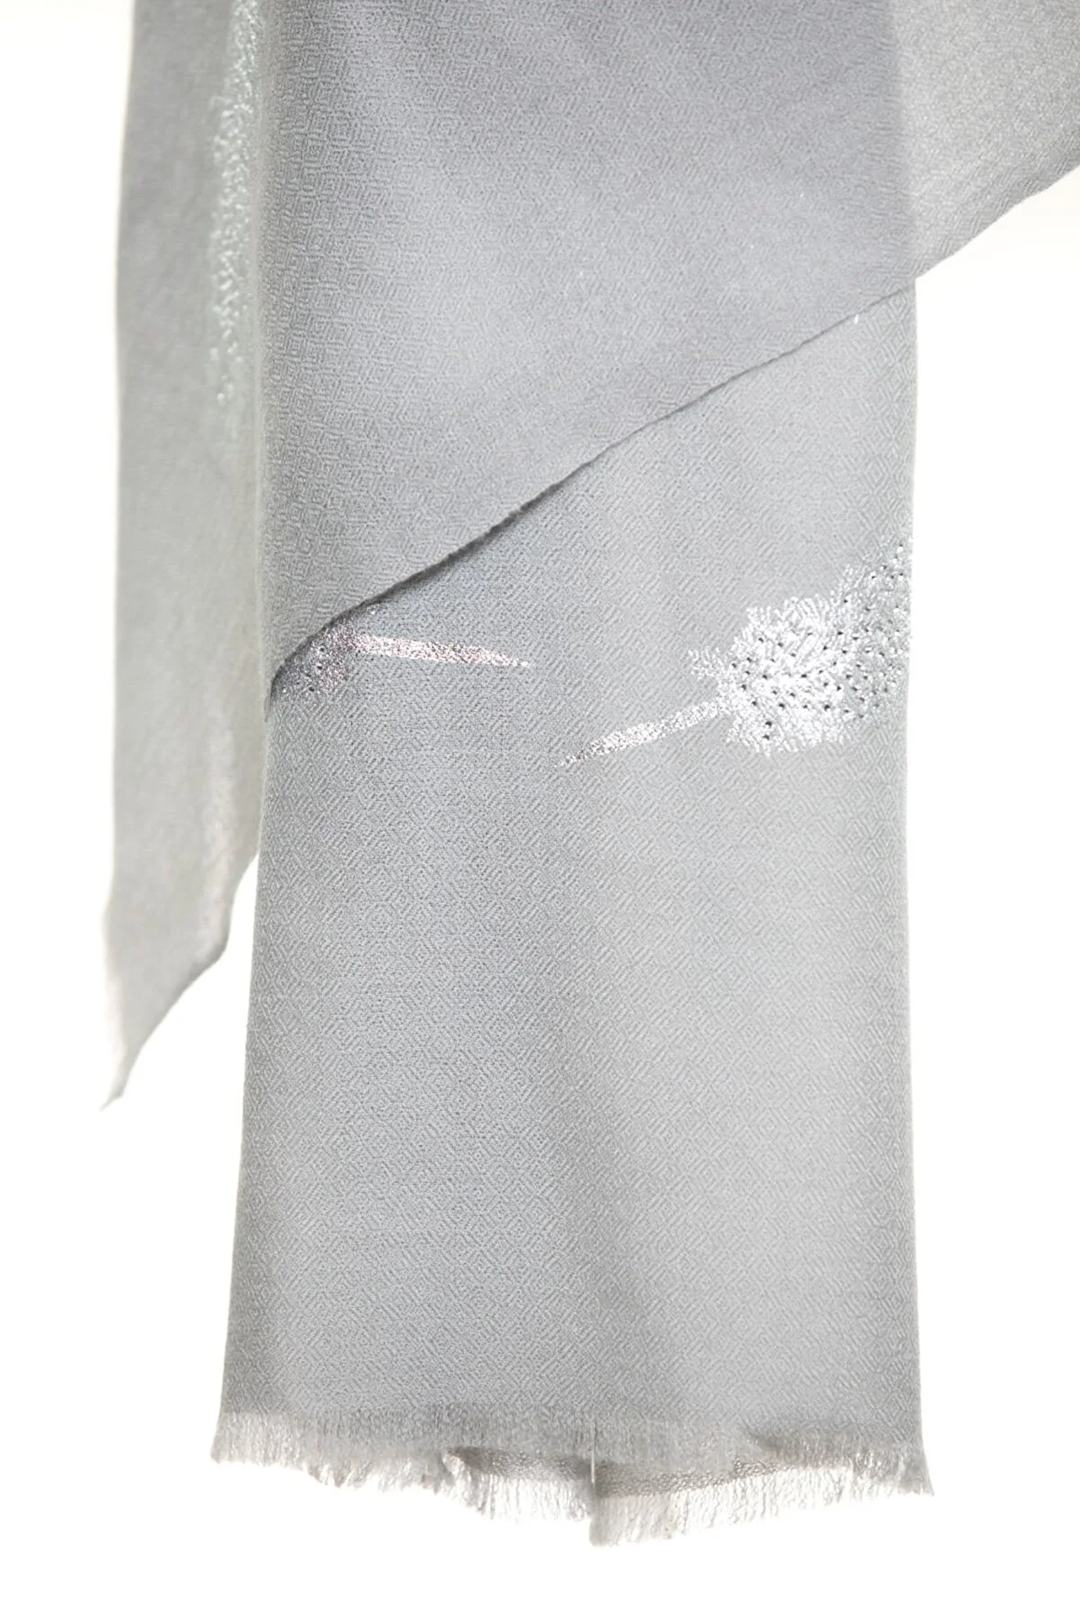 Angel Feathers Crystal Feathers Shawl Stole - Light Gray Silver